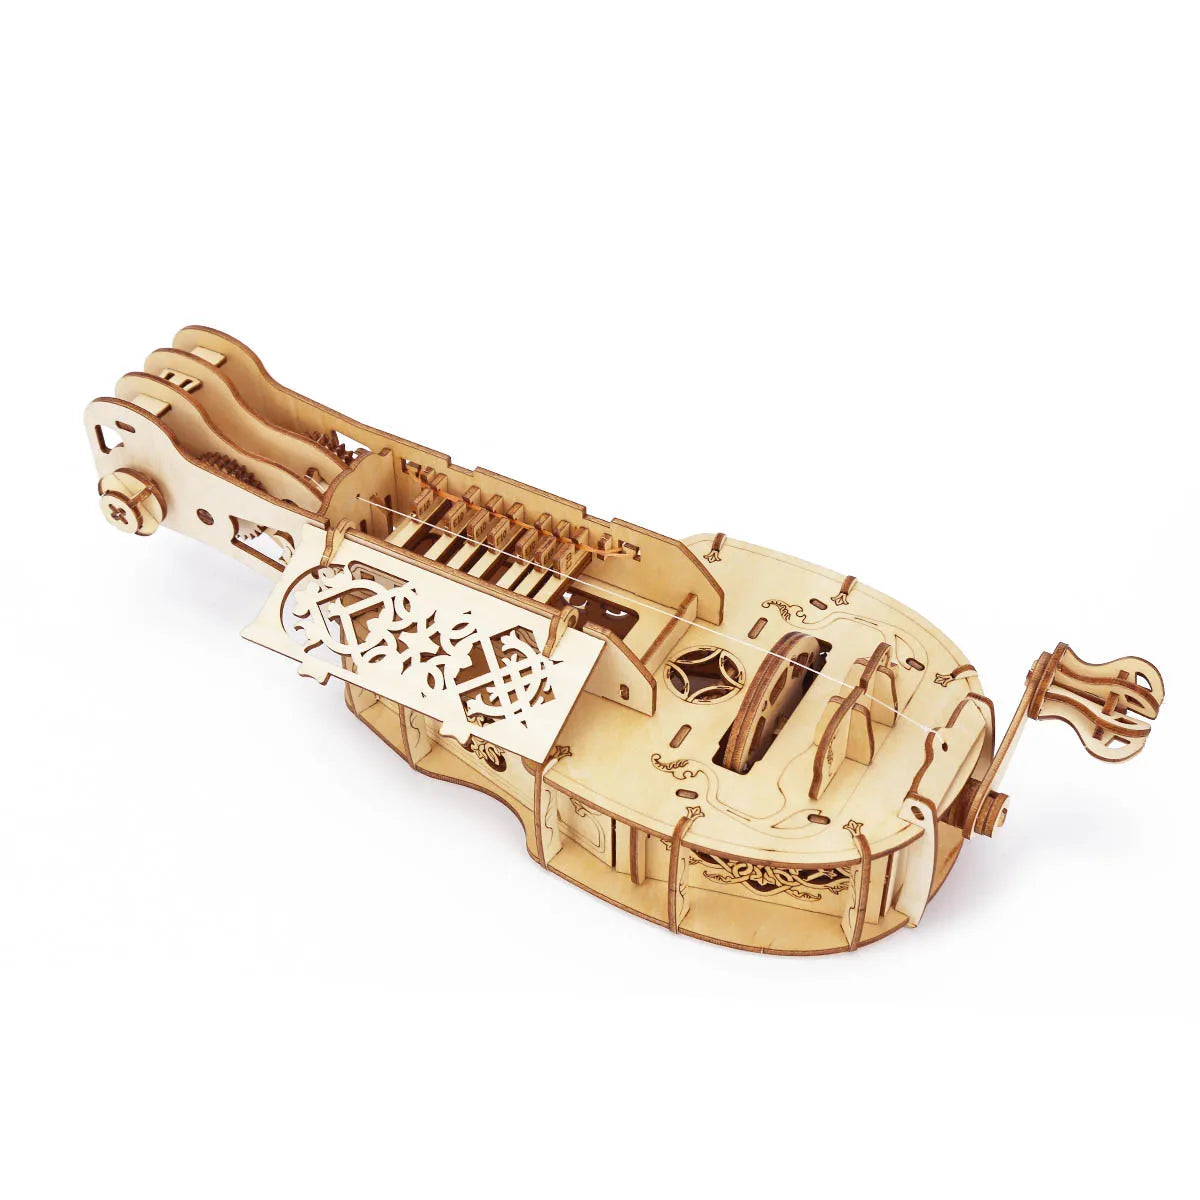 Build Your Own Hurdy Gurdy Mechanical Musical Instrument 3D Wooden Puzzle - ToylandEU